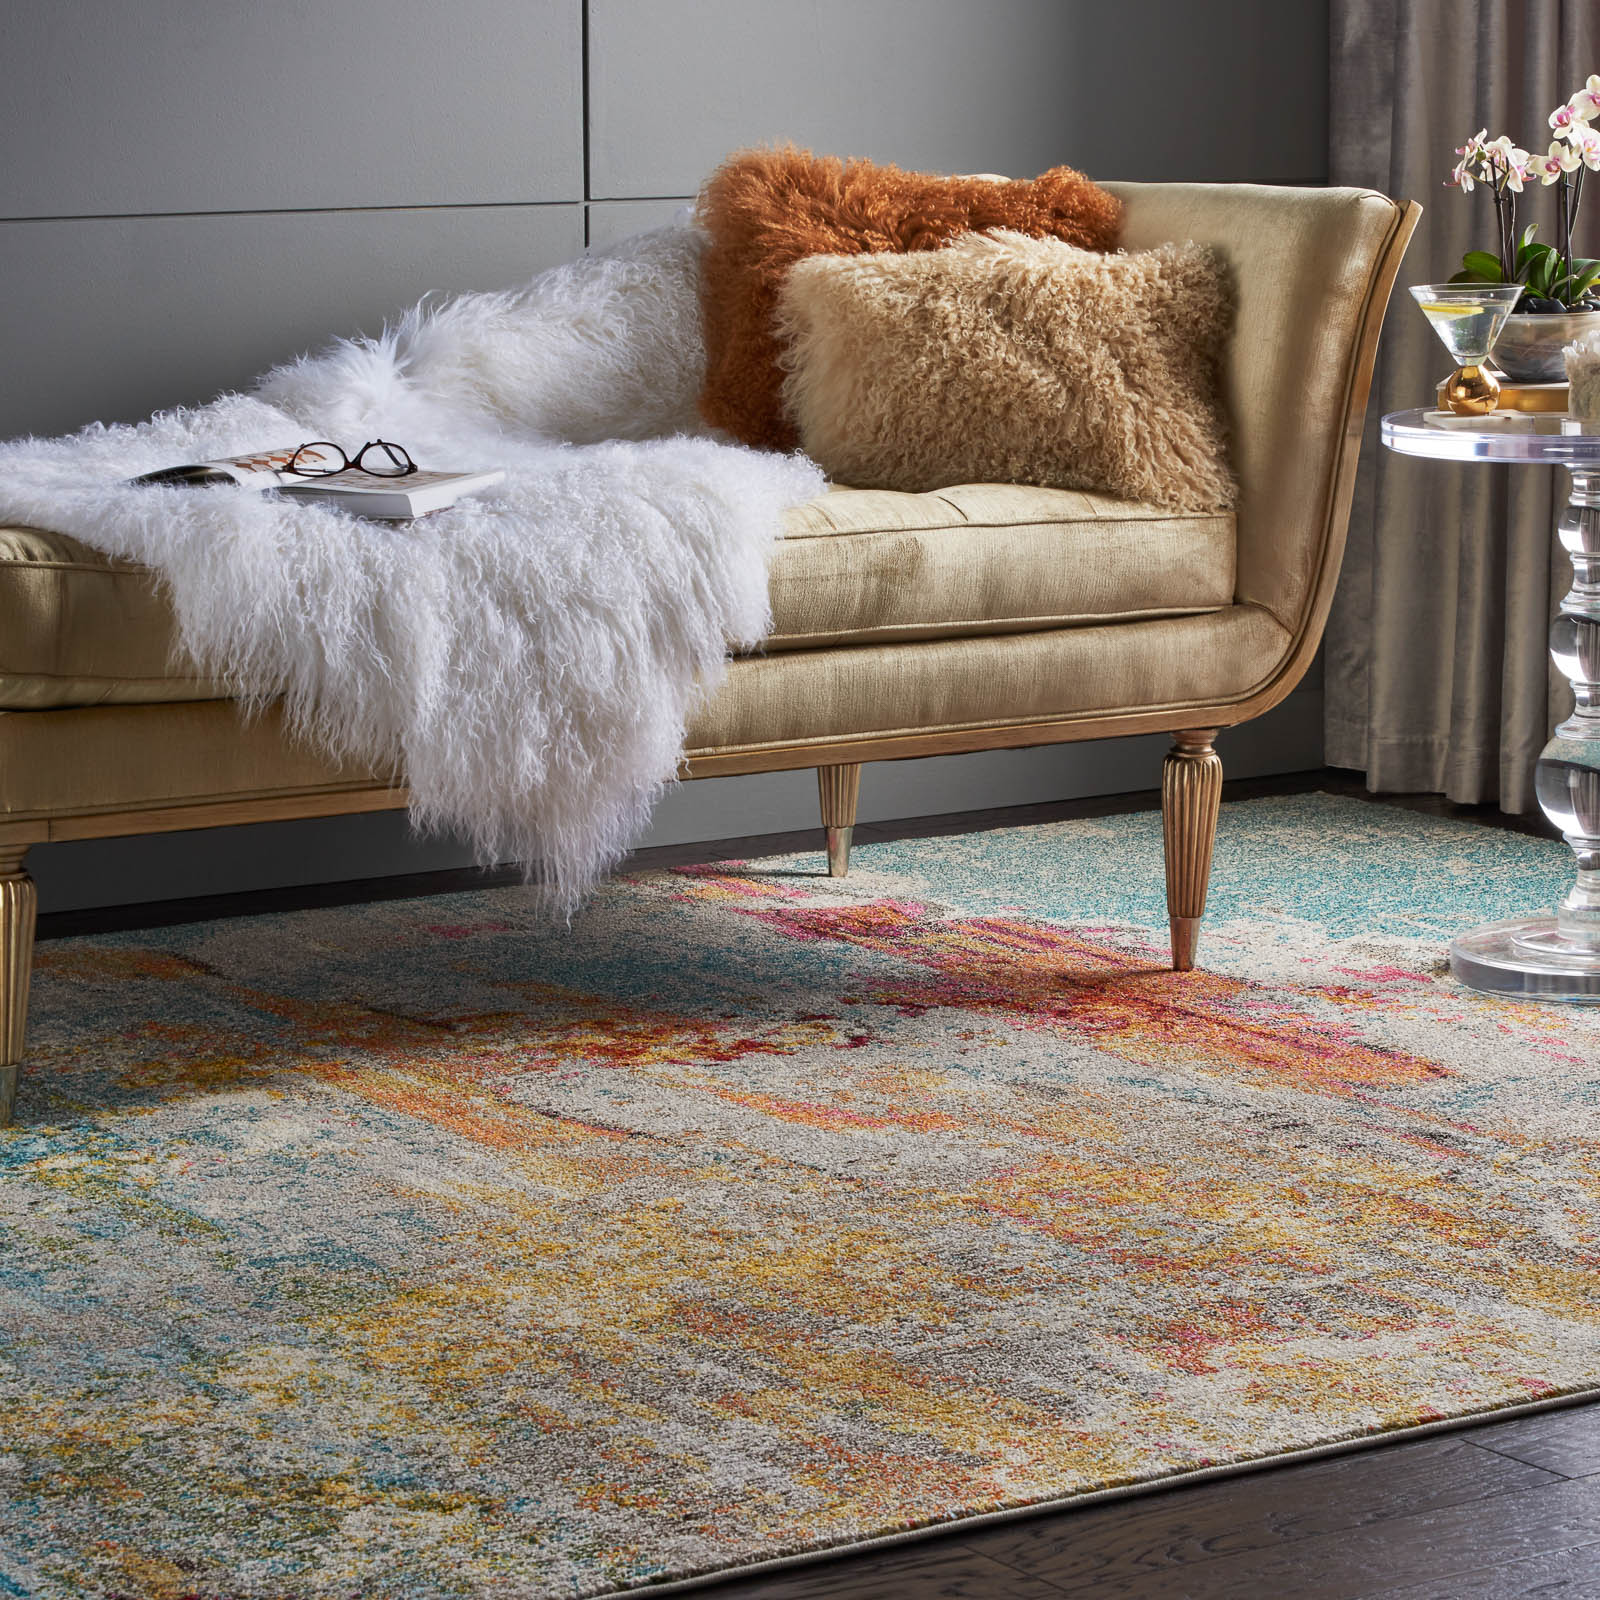 How Rugs Are Used In Business and at Work